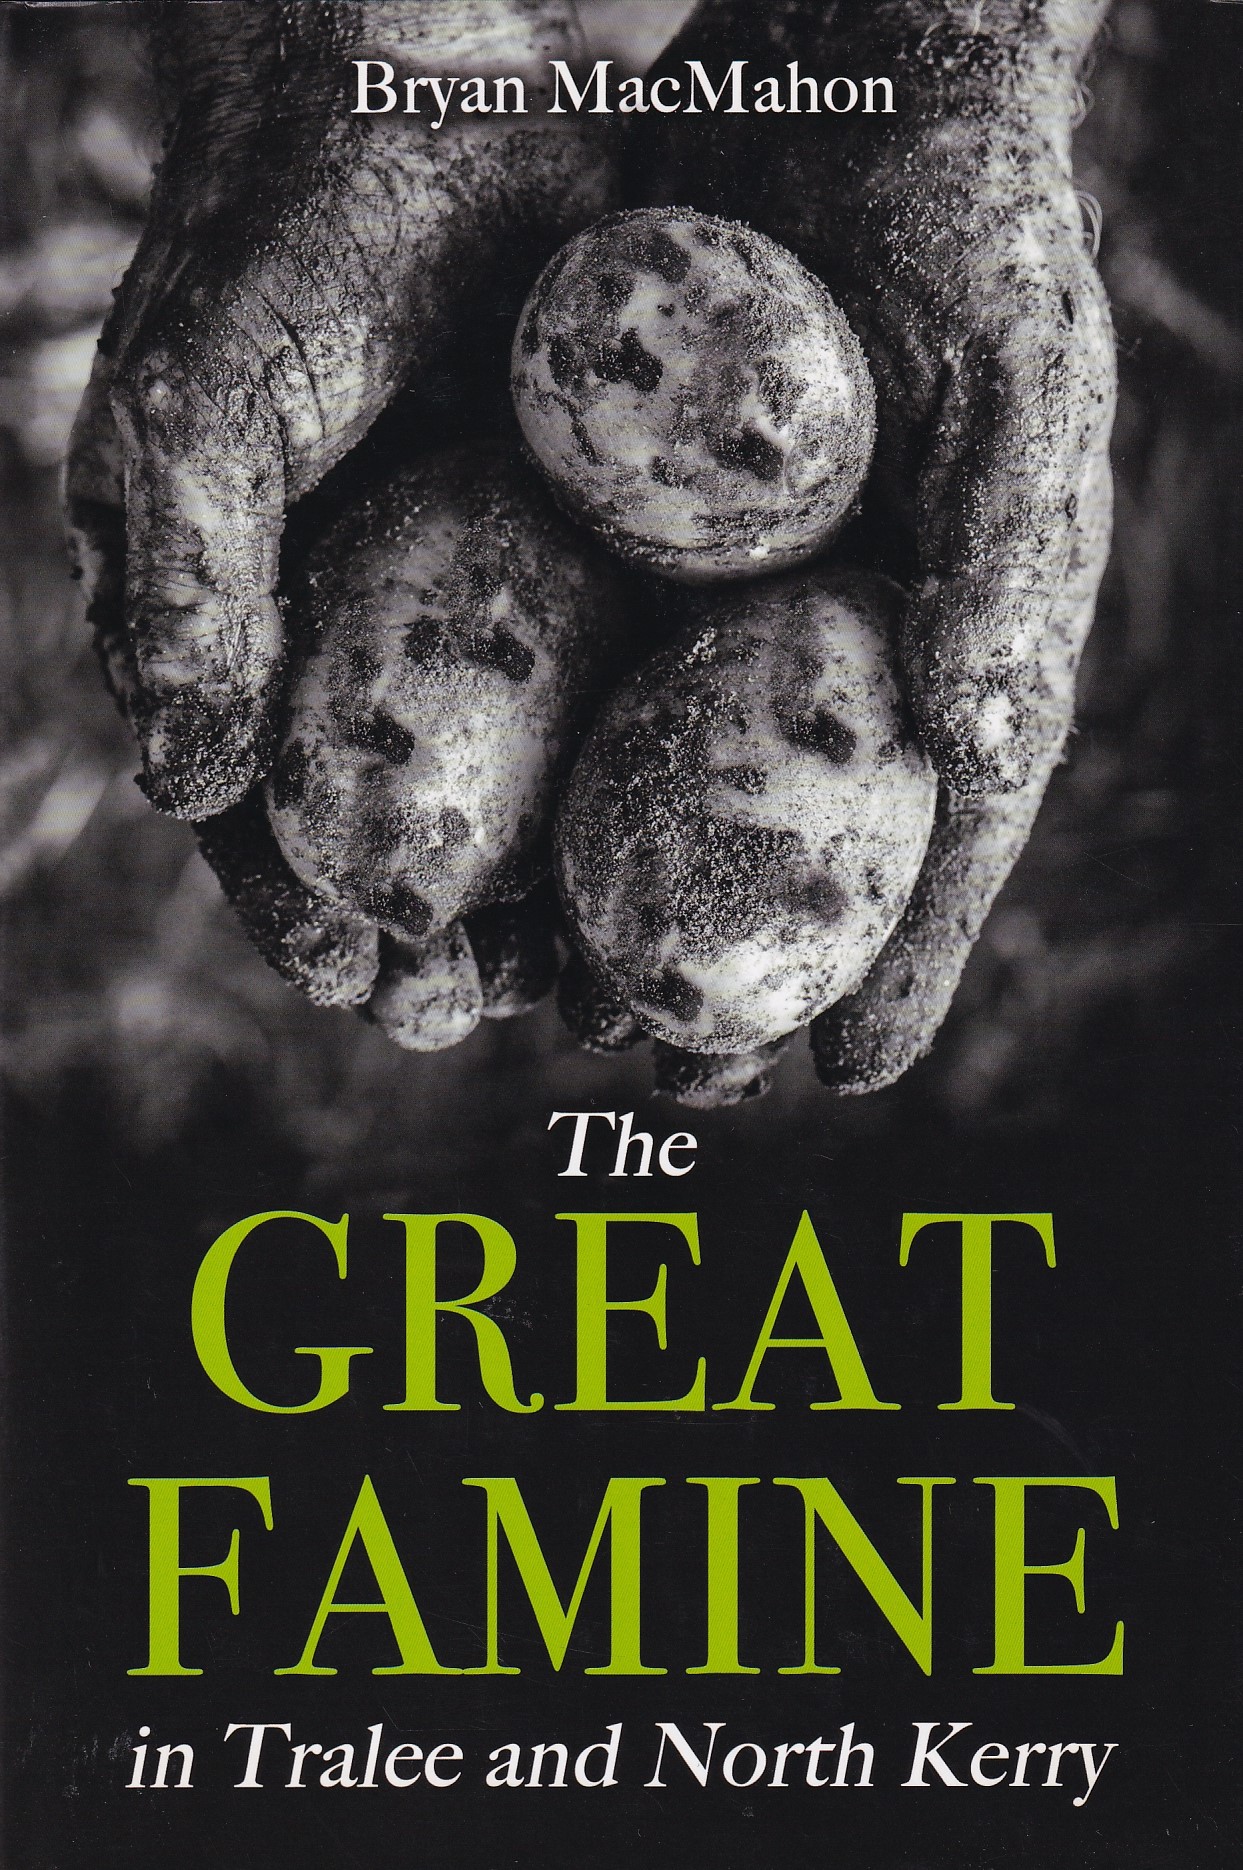 The Great Famine in Tralee and North Kerry by Bryan MacMahon